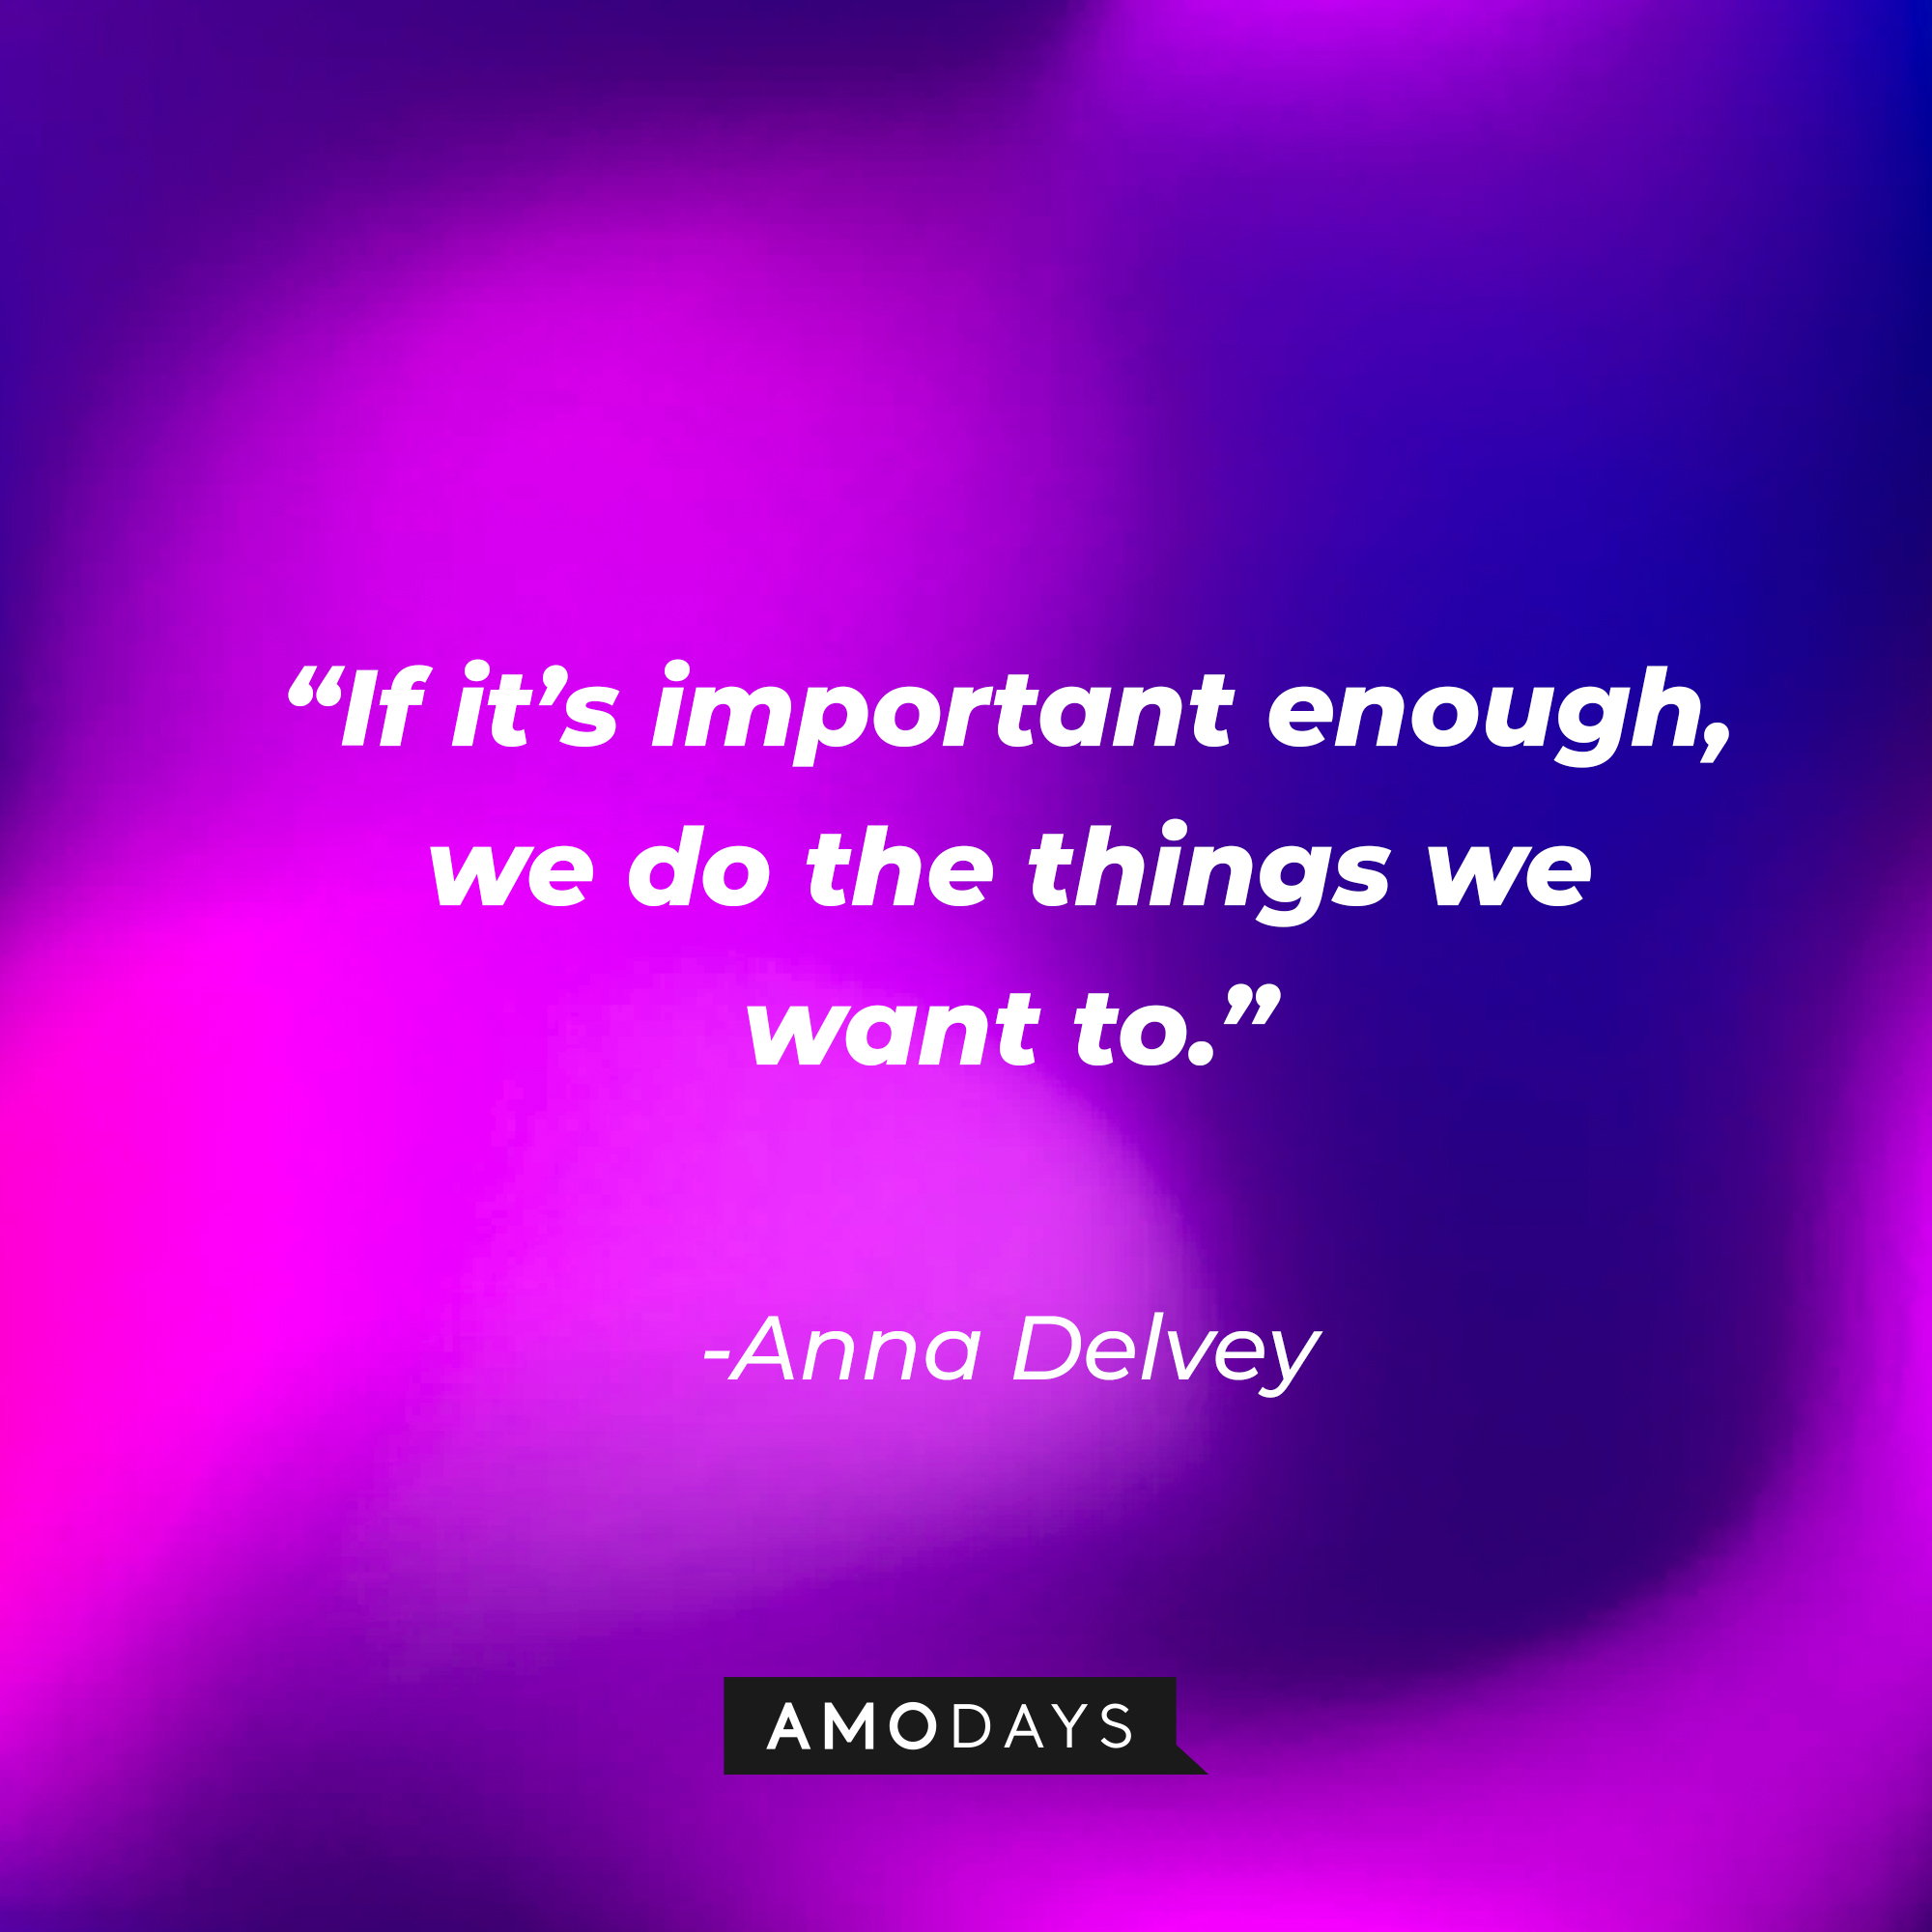 Julia Garner’s portrayal/version of Anna Delvey’s quote:“If it’s important enough, we do the things we want to.” | Source: AmoDays